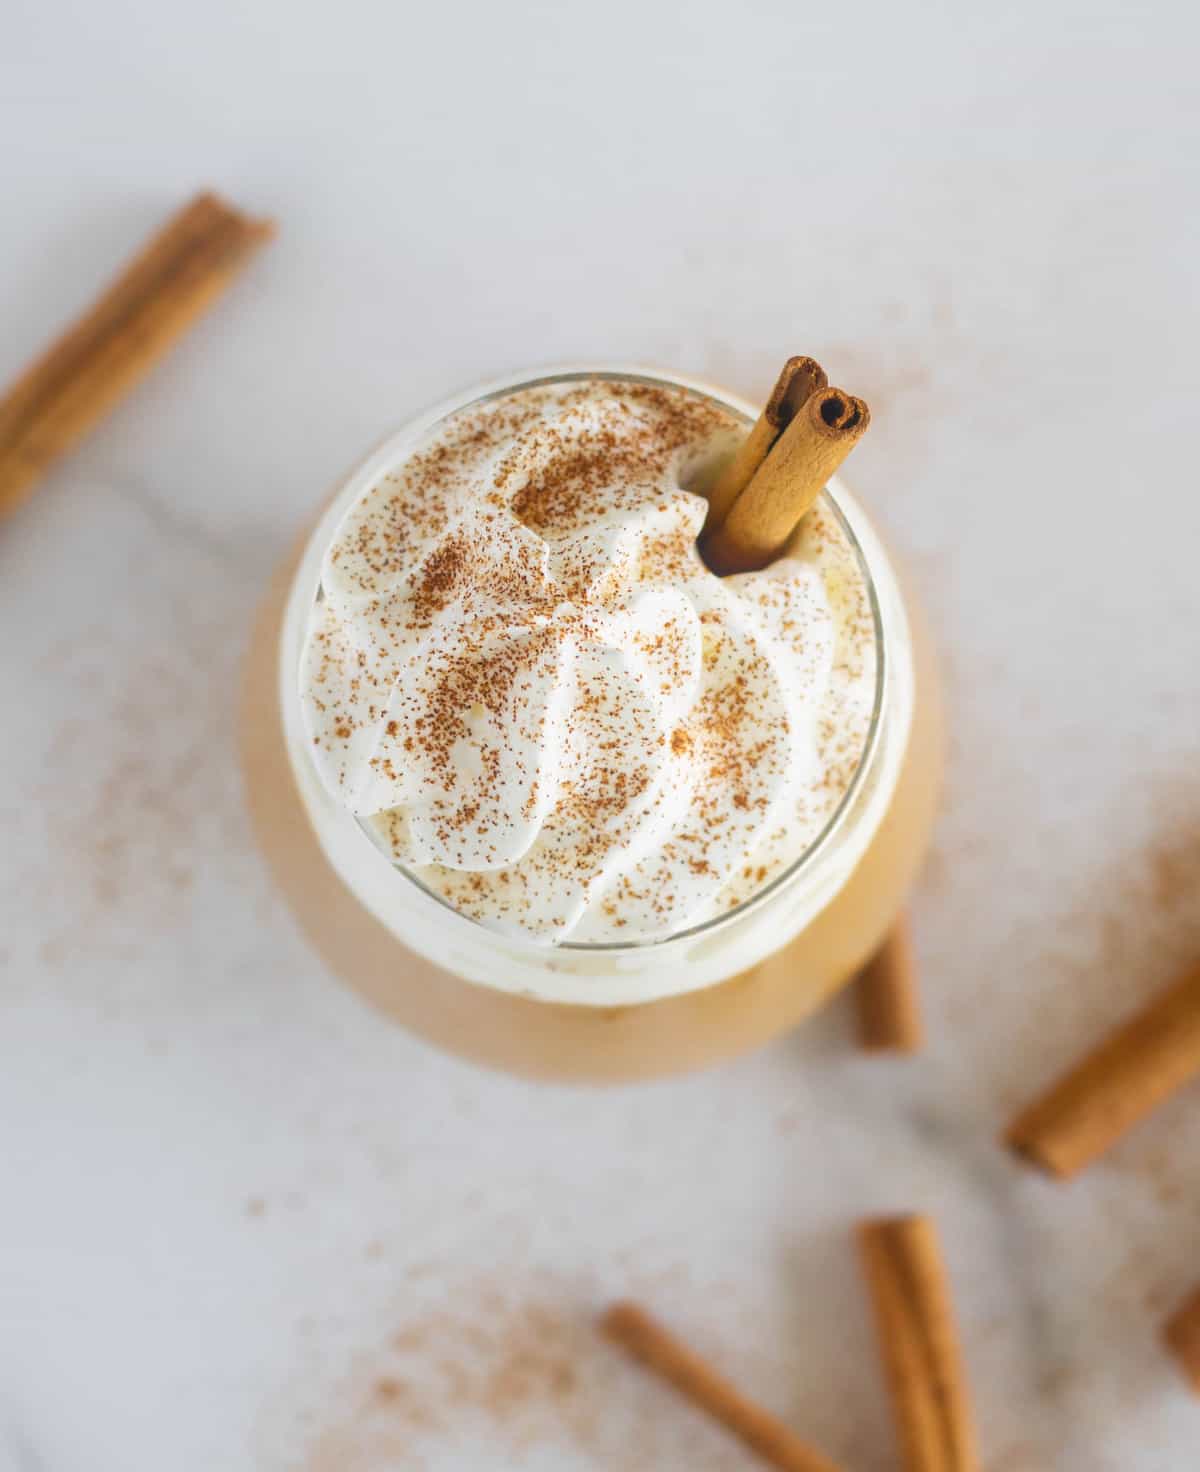 Overhead shot of smoothie with whipped cream and cinnamon sticks.